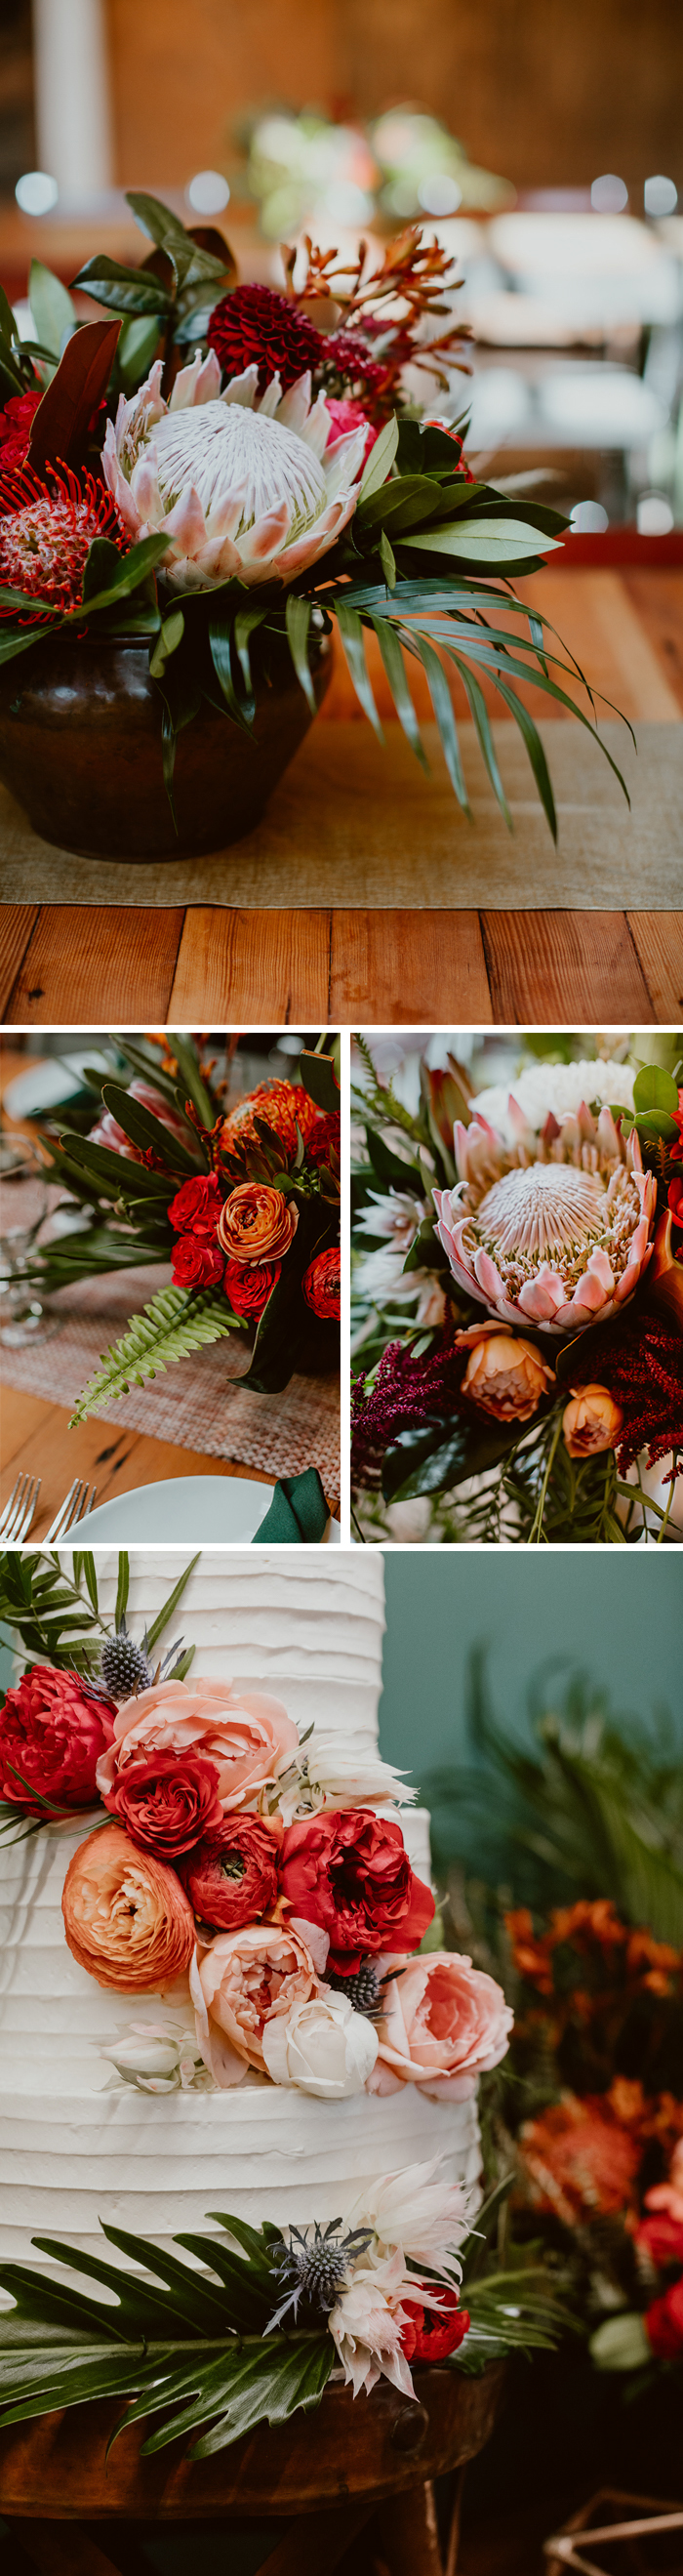 A tropical arrangement features King Protea, bold and colorful floral details in shades of red and orange, and a decadent cake with fresh florals.